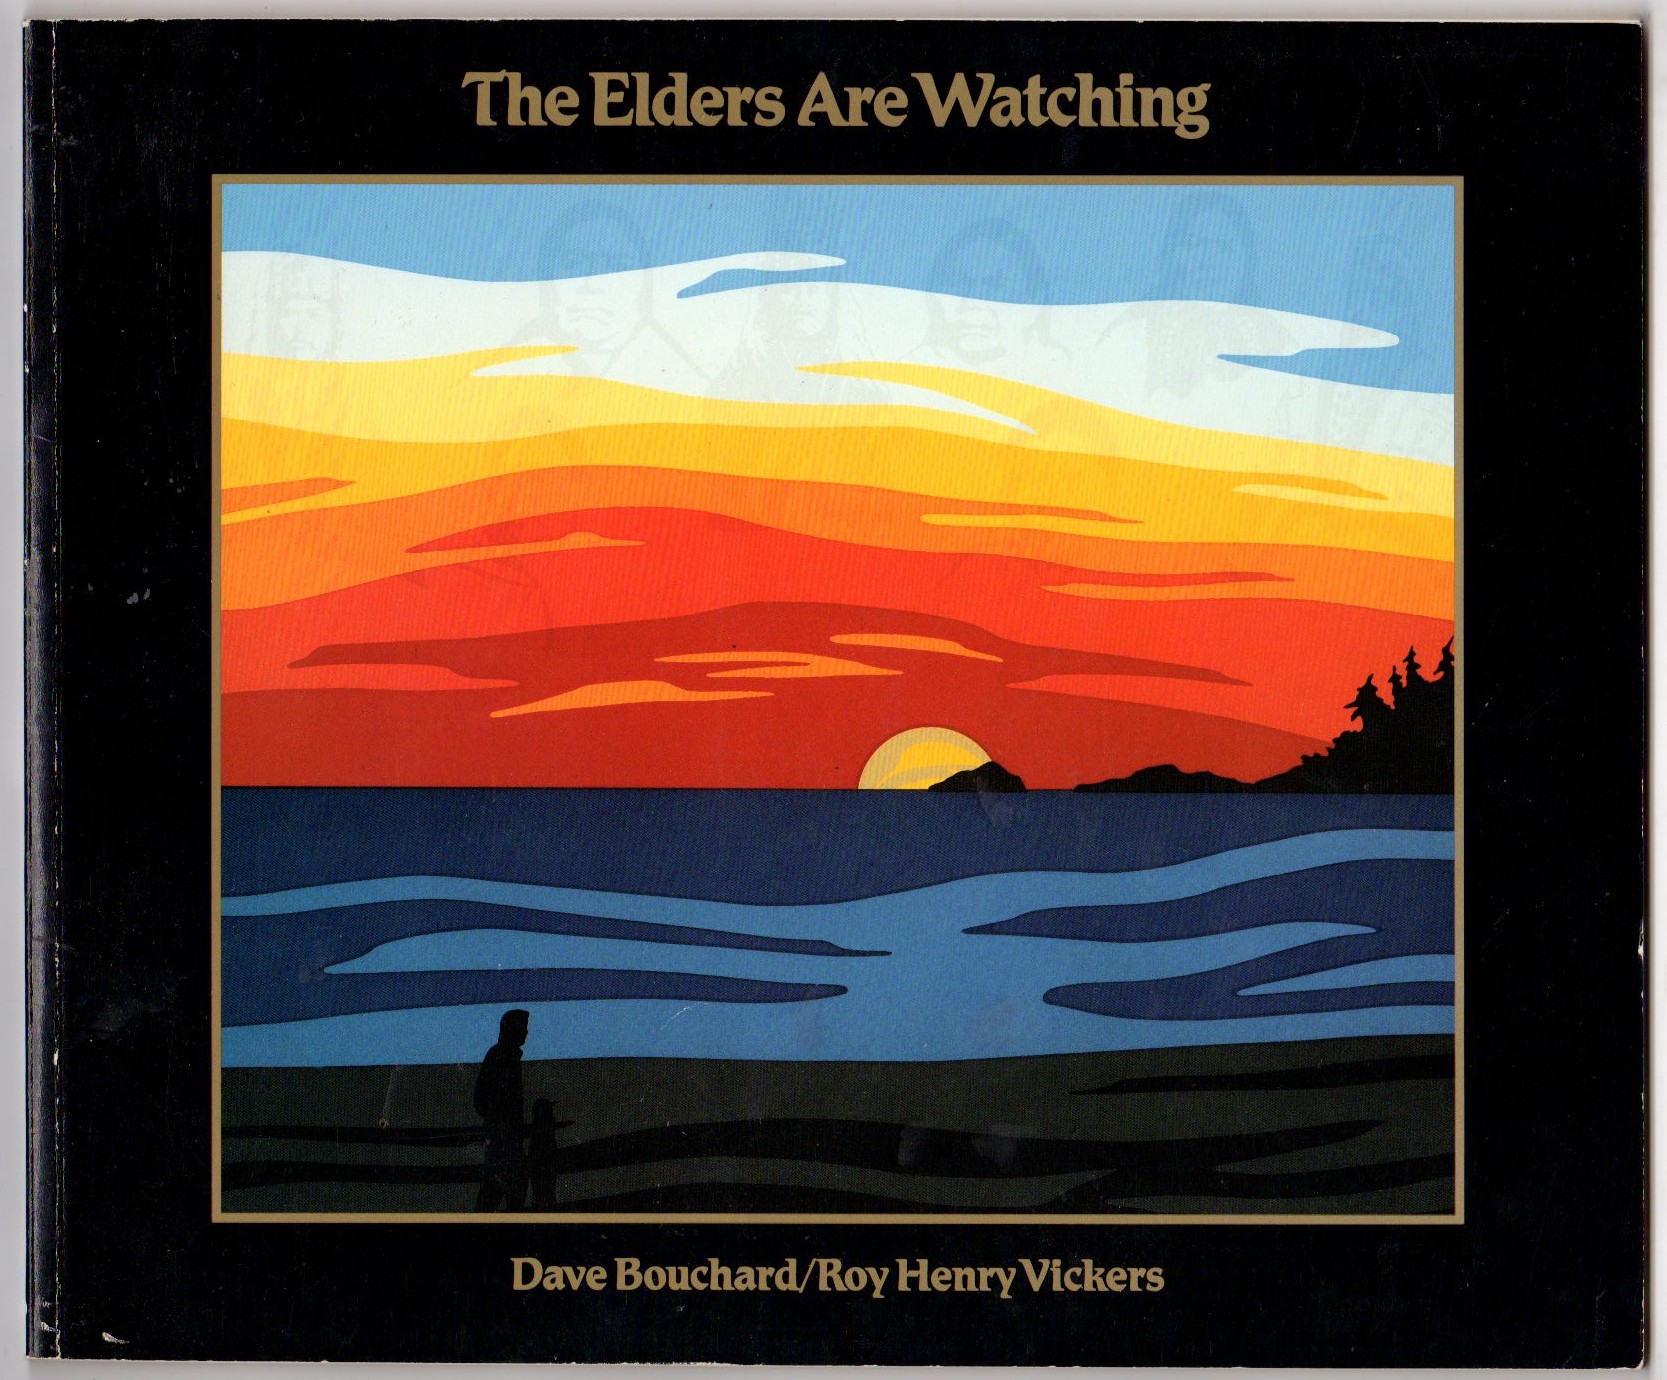 BOUCHARD, DAVE & ROY HENRY VICKERS - The Elders Are Watching